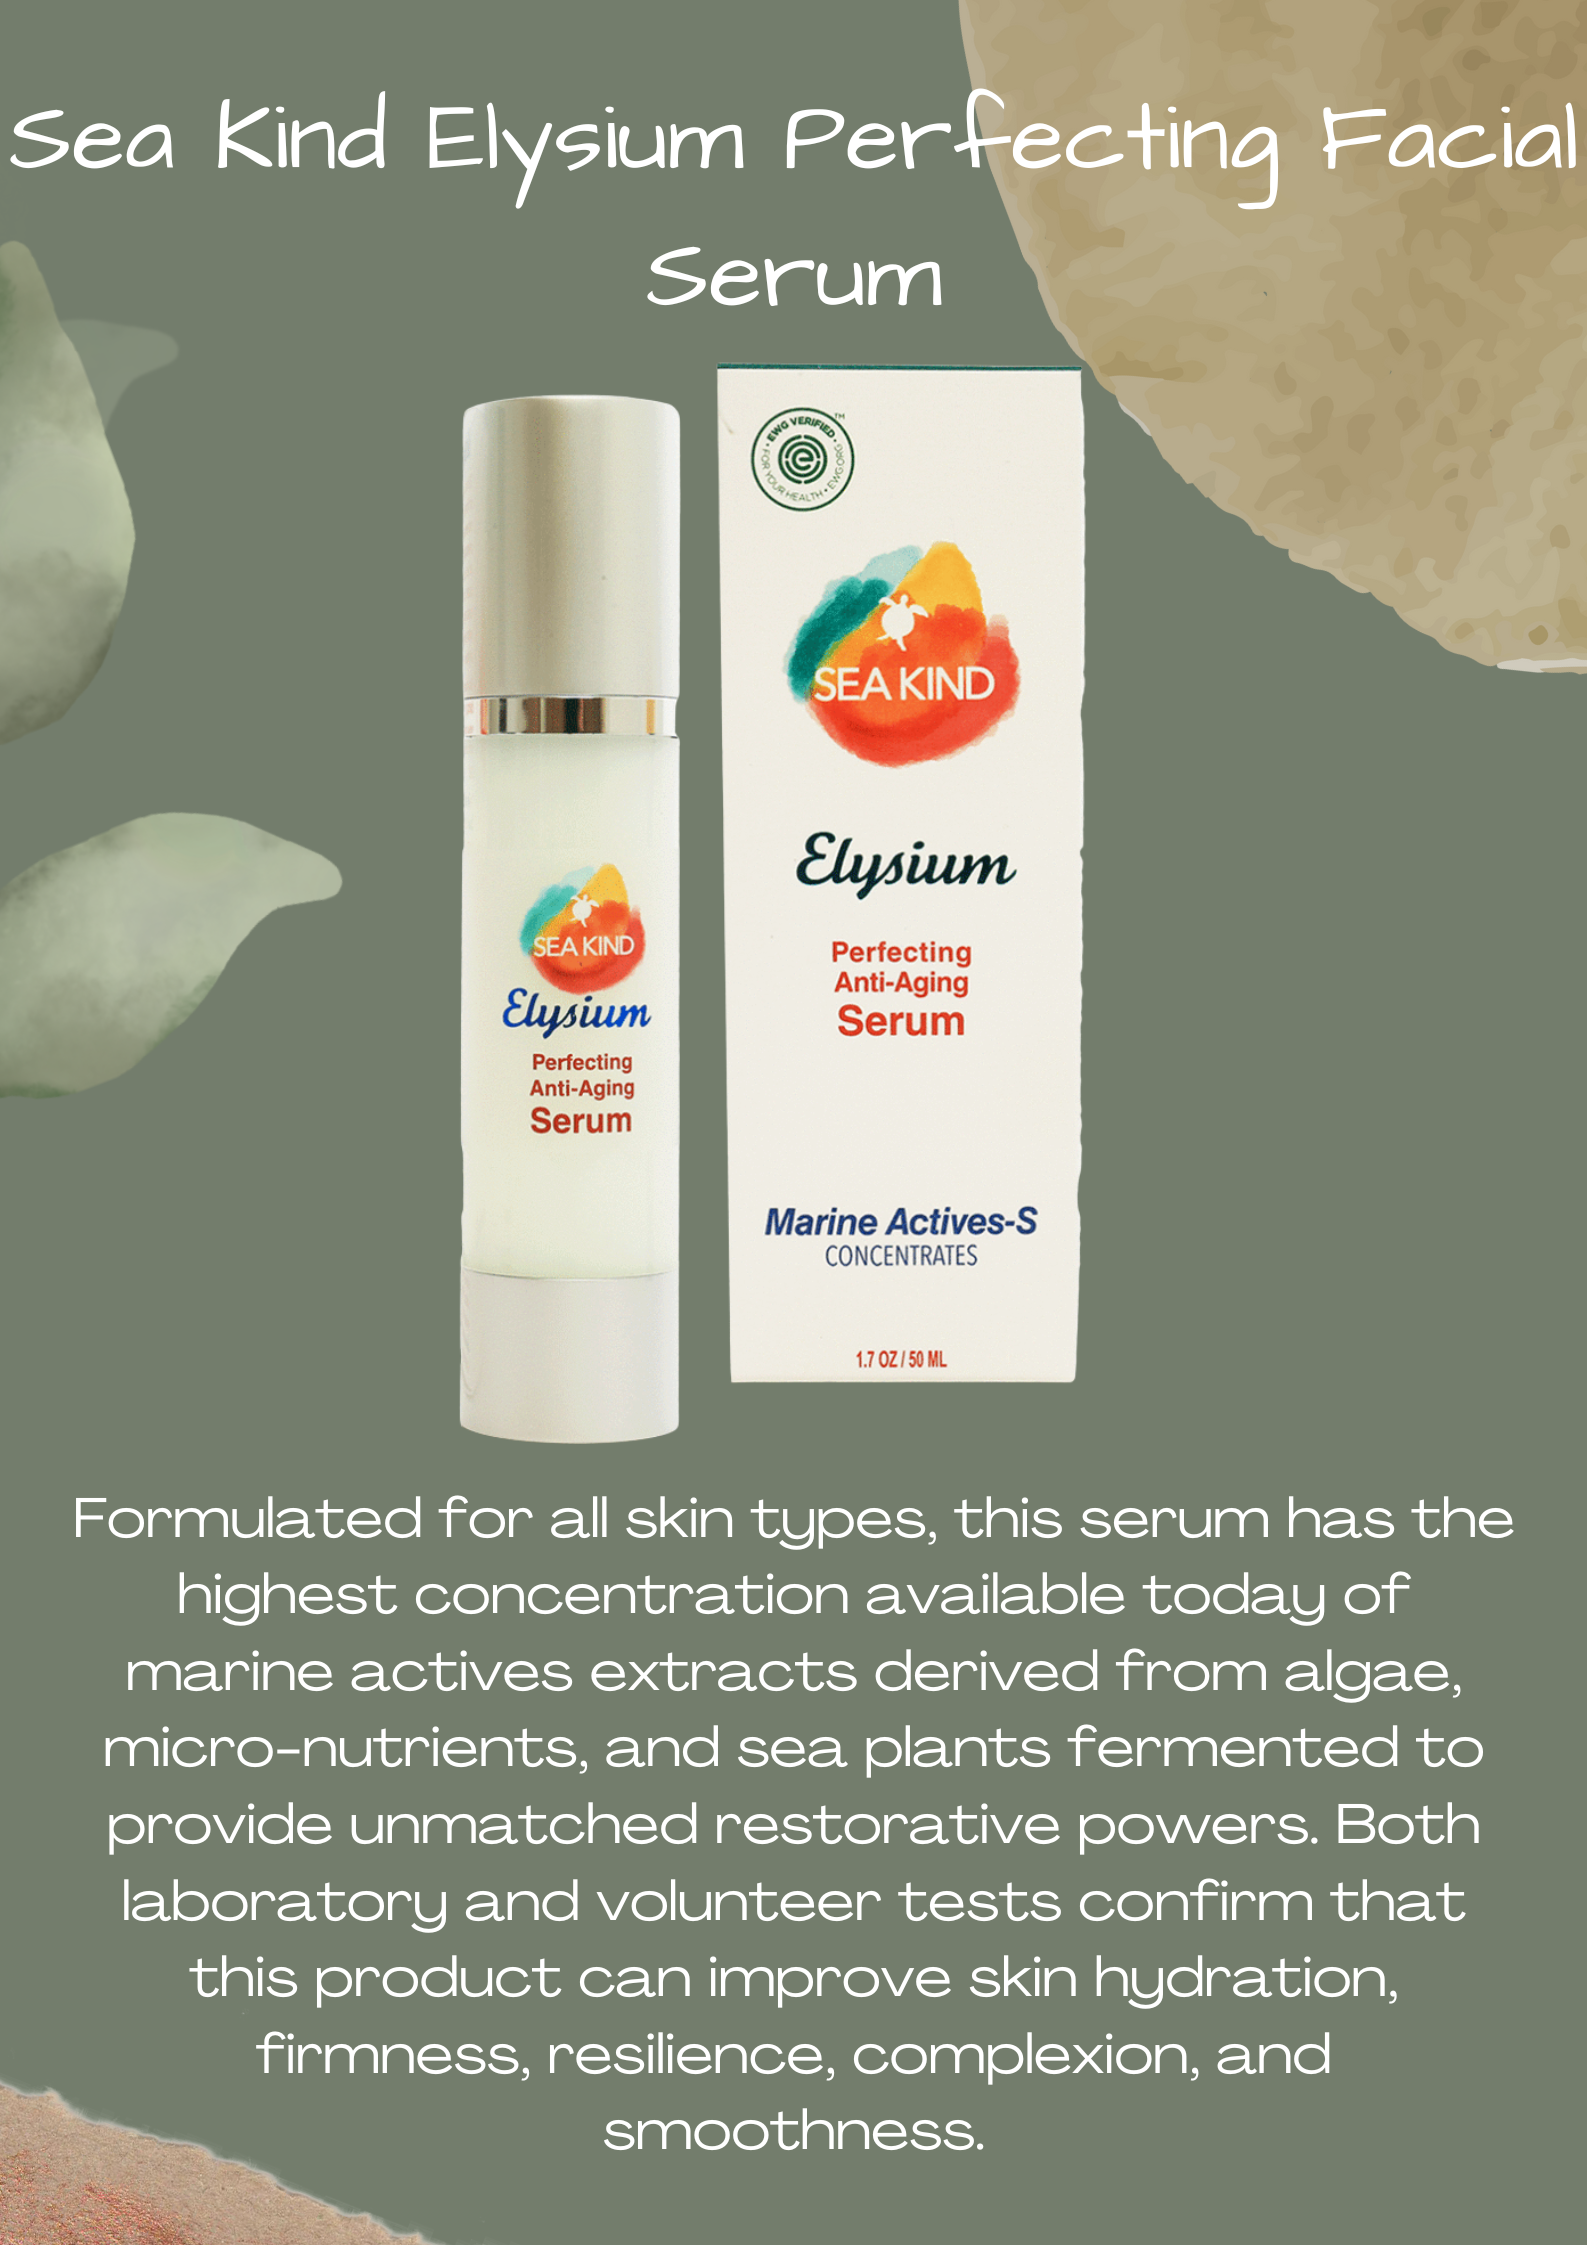 Sea Kind Elysium Perfecting Facial Serum: Formulated for all skin types, this serum has the highest concentration available today of marine actives extracts derived from algae, micro-nutrients, and sea plants fermented to provide unmatched restorative powers. Both laboratory and volunteer tests confirm that this product can improve skin hydration, firmness, resilience, complexion, and smoothness.